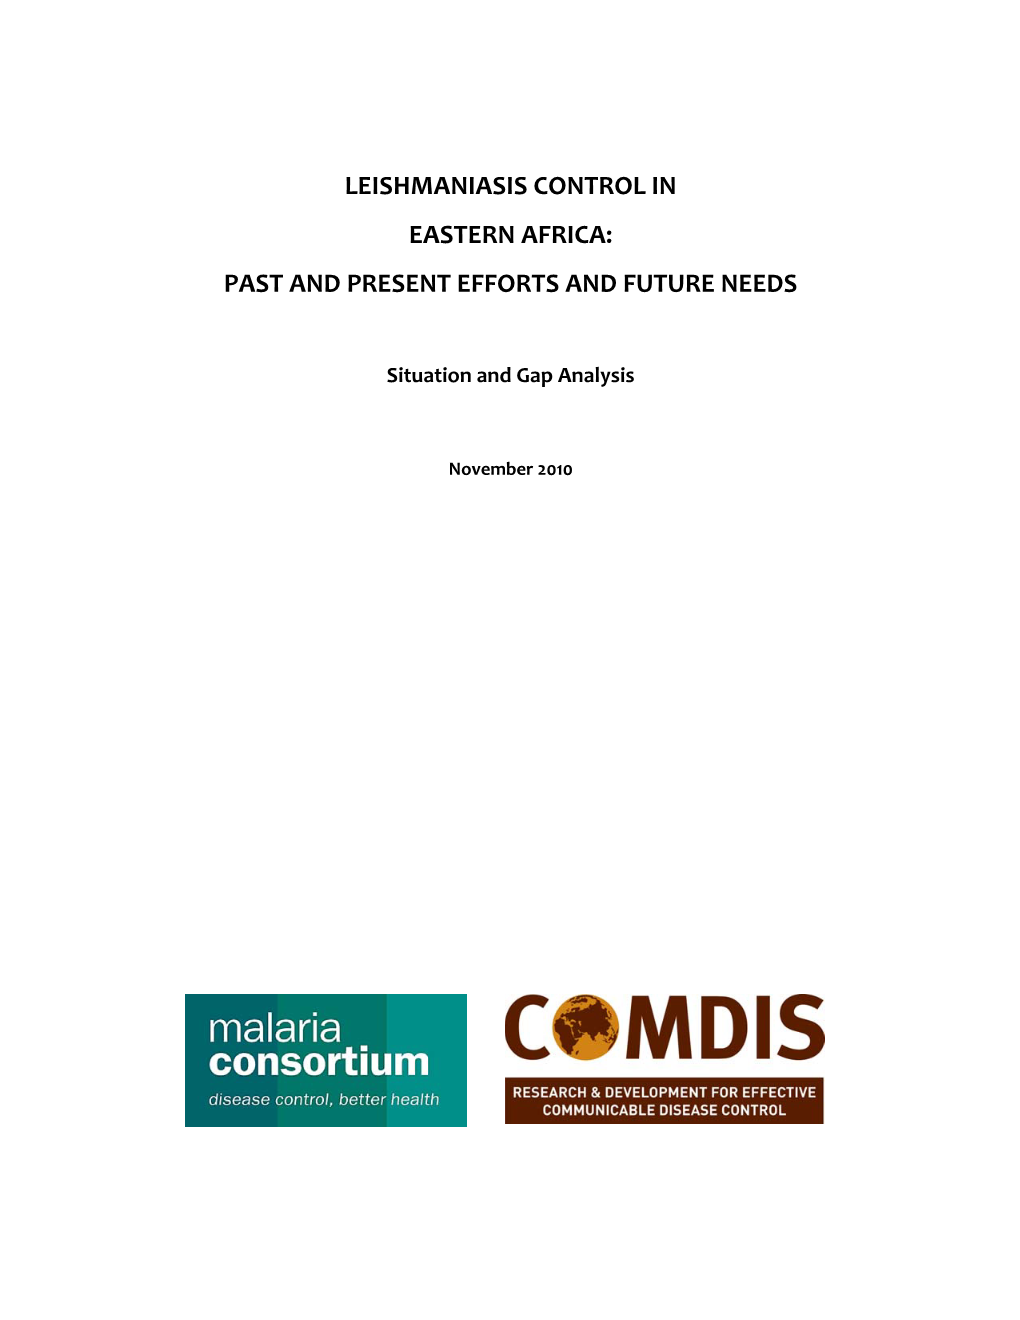 Leishmaniasis Control in Eastern Africa: Past and Present Efforts and Future Needs